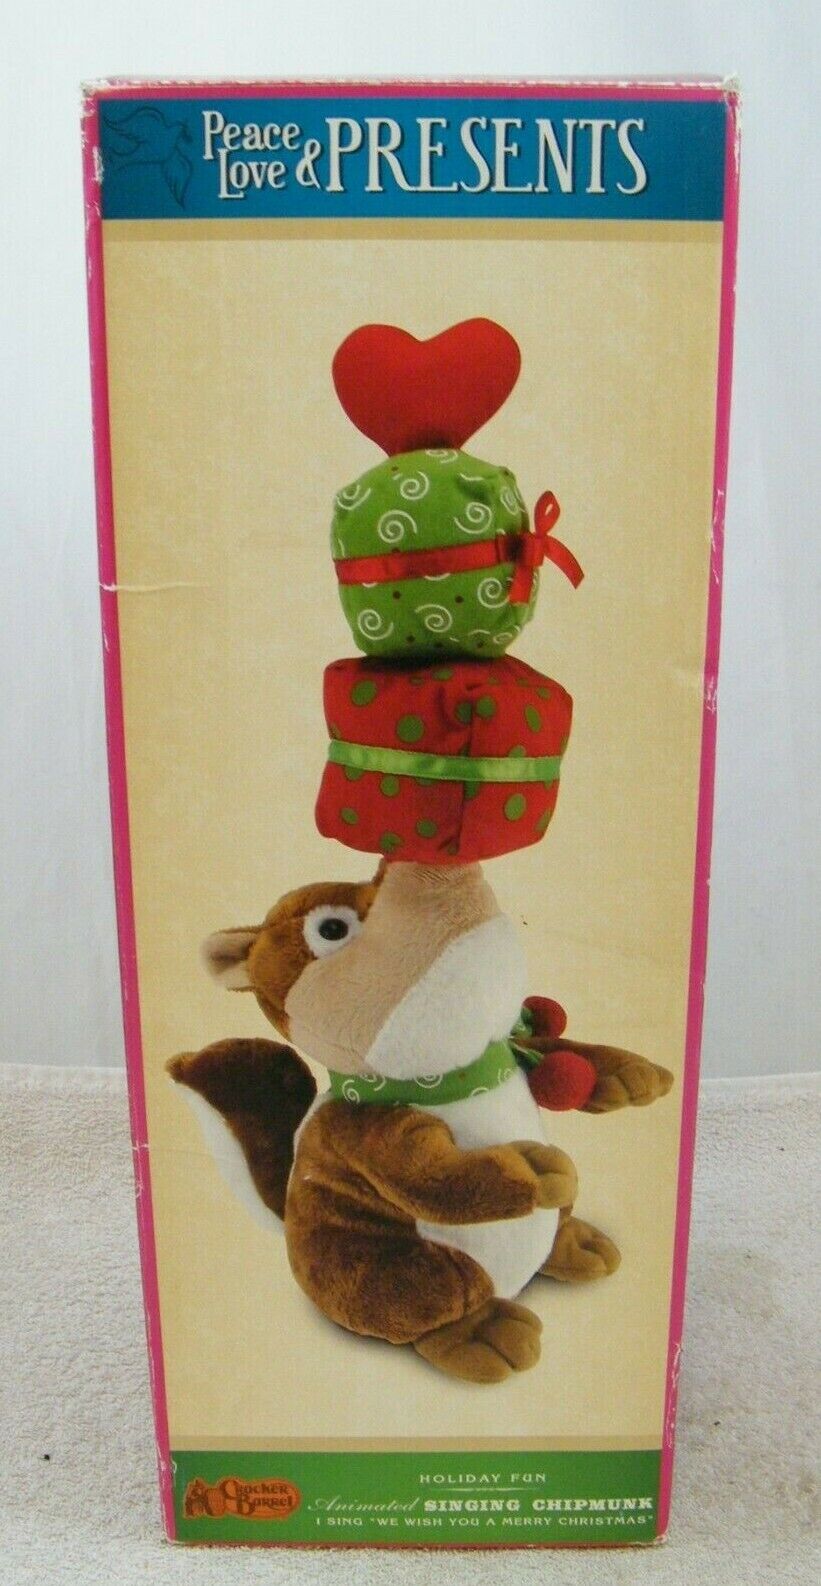 NEW CRACKER BARREL PEACE LOVE & PRESENTS ANIMATED CHIPMUNK SING MERRY CHRISTMAS